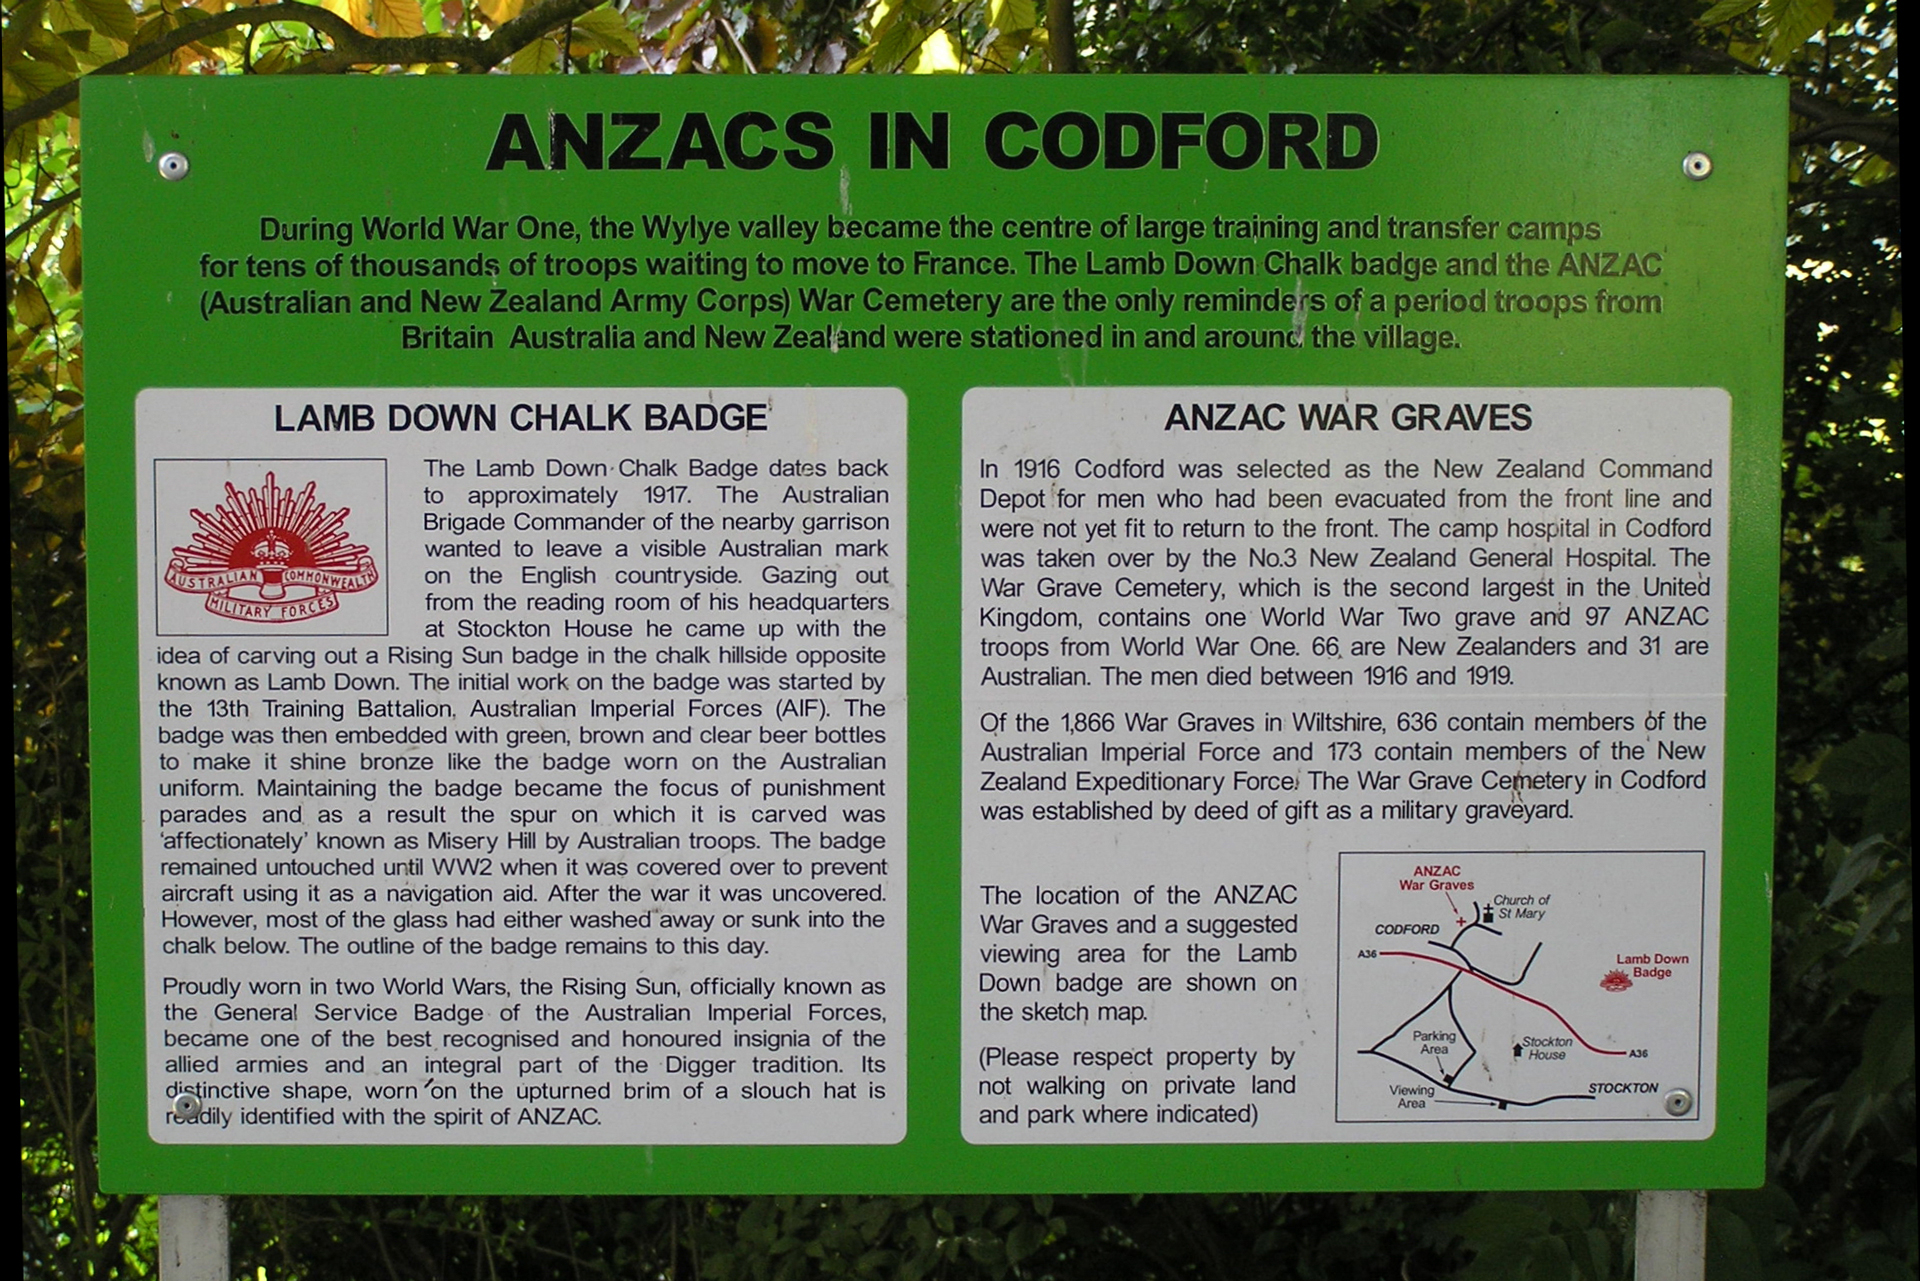 Ansacs in Codford